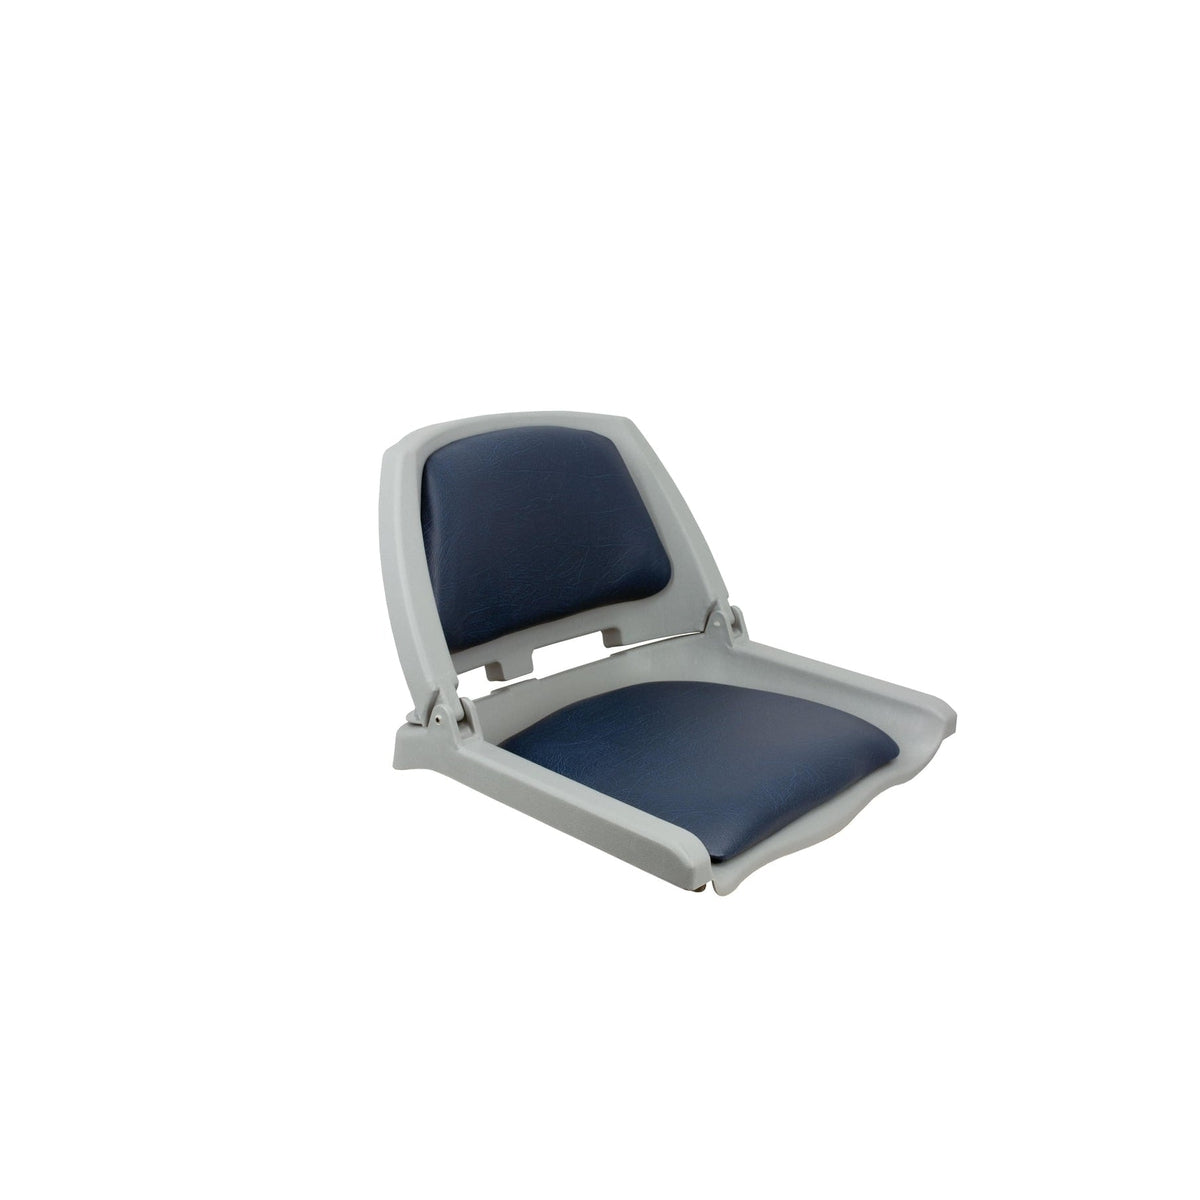 Springfield Not Qualified for Free Shipping Springfield Traveler Folding Seat Gray with Blue Cushion #1061112-C